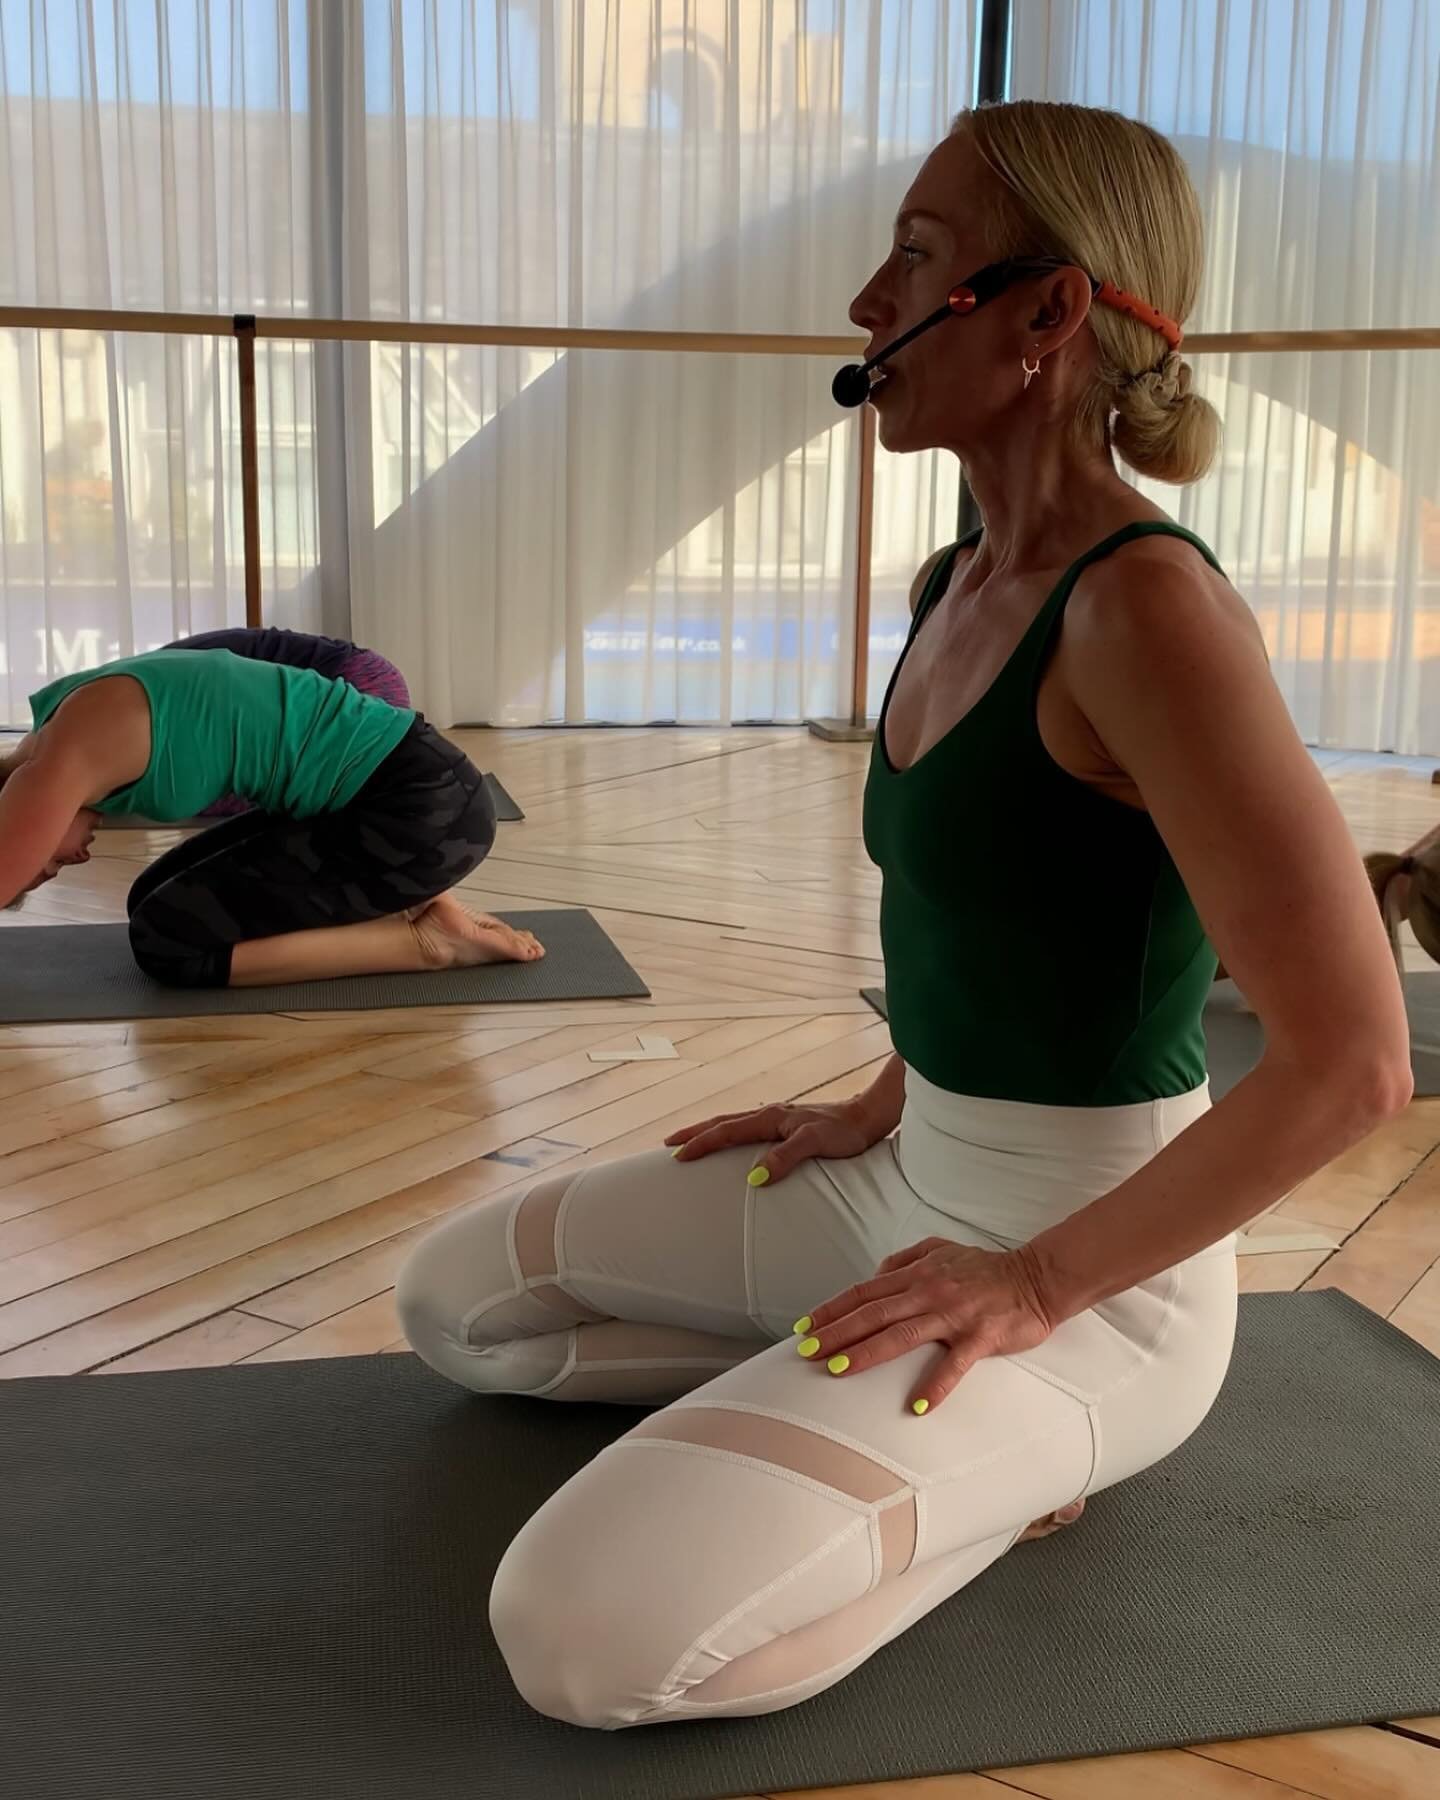 LOW BACK PAIN WORKSHOP | 
SUNDAY MAY 12TH | 2-4PM

Join Jaime* for a 2hr transformative workshop which will focus on strengthening the deep core and trunk muscles that weaken with back pain as well as learning to control your spinal position and move